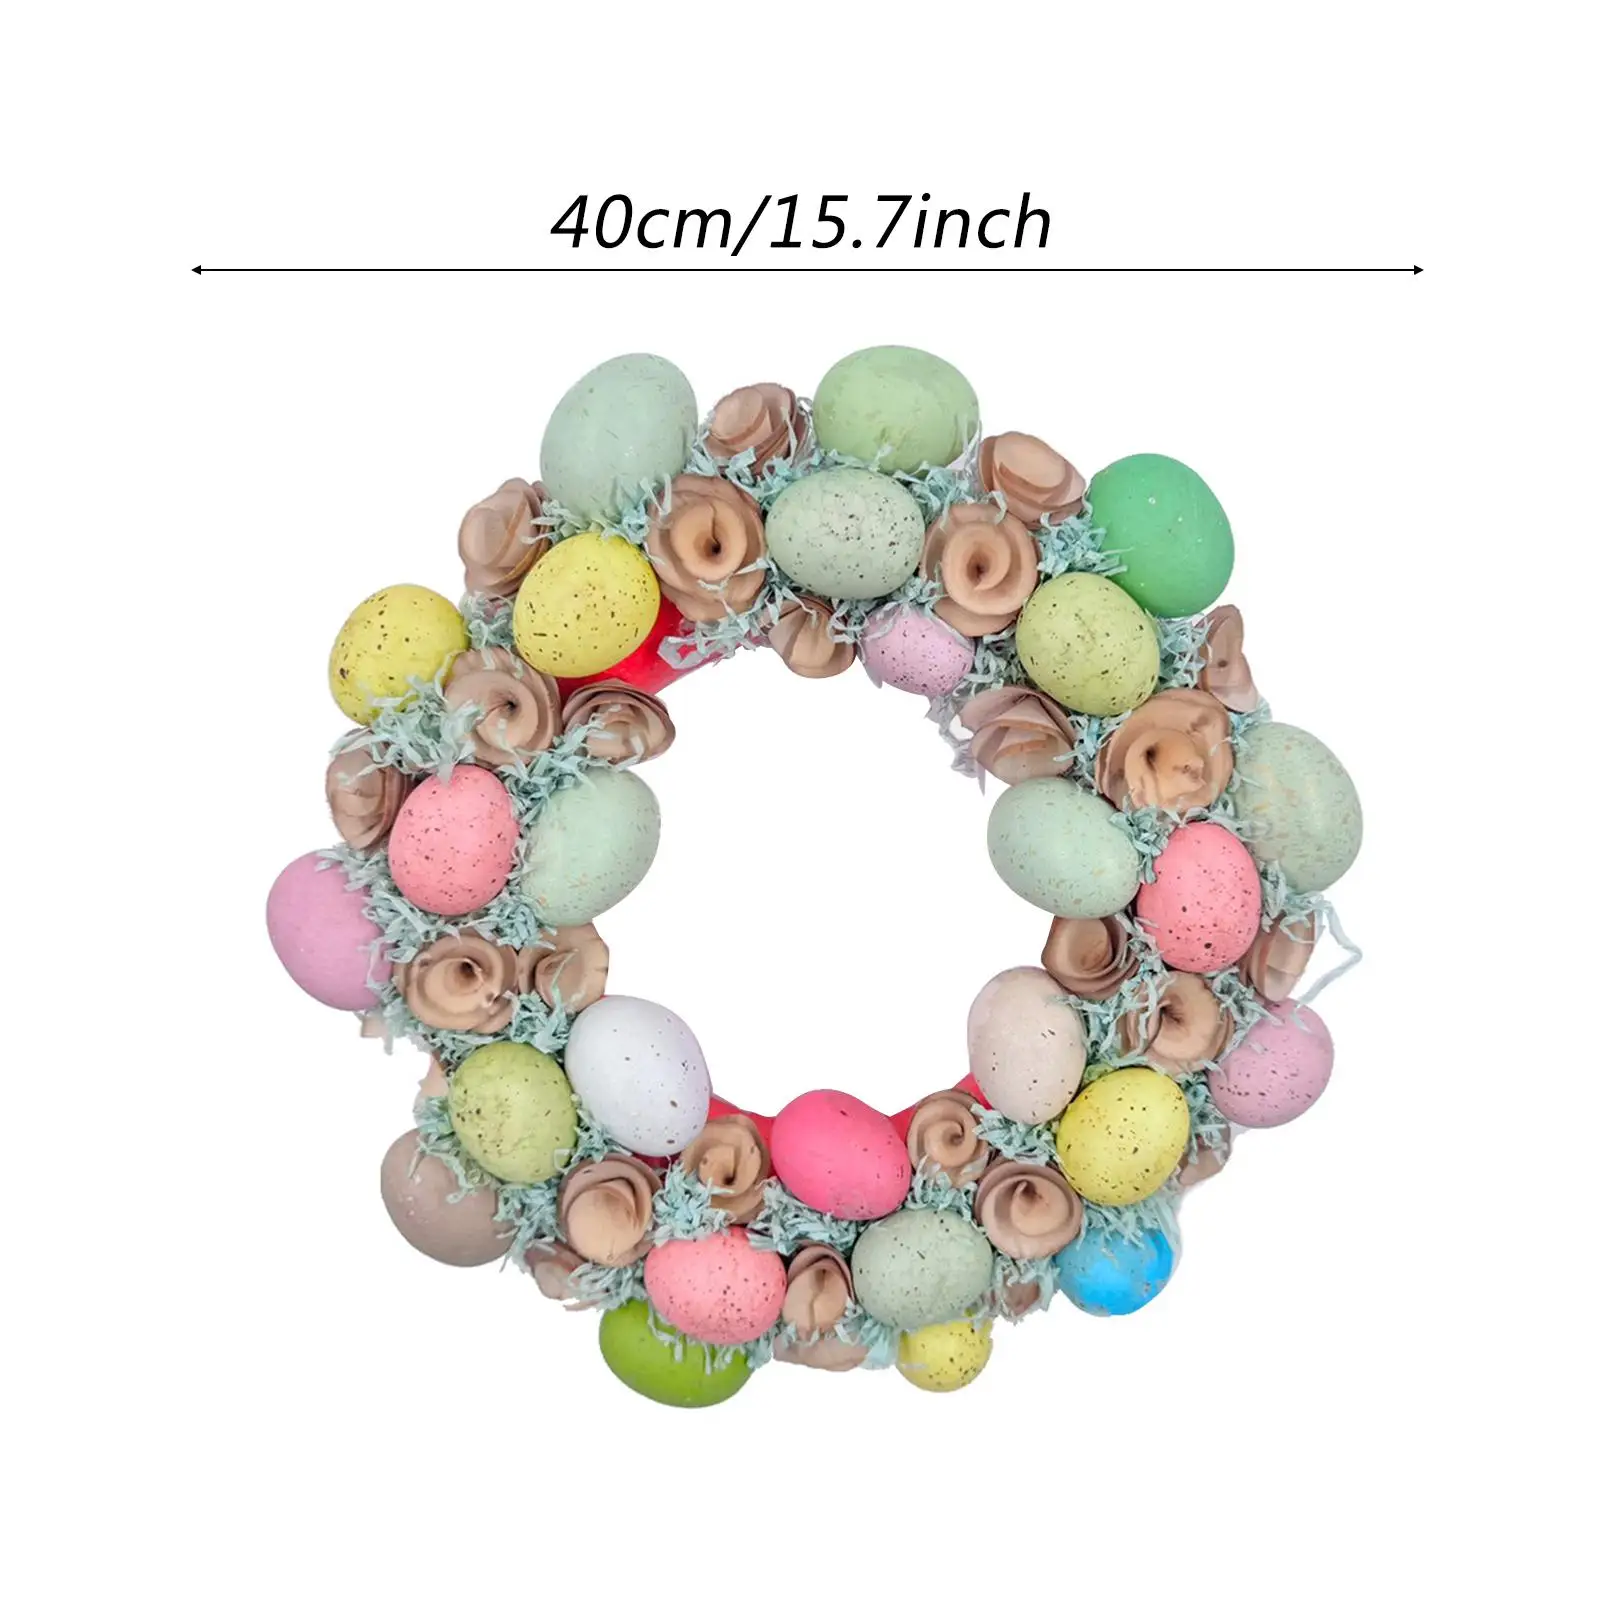 16inch Colorful Easter Egg Wreath Decoration Easter Party Supplies for Farmhouse Home Decor Accessory Sturdy Multipurpose